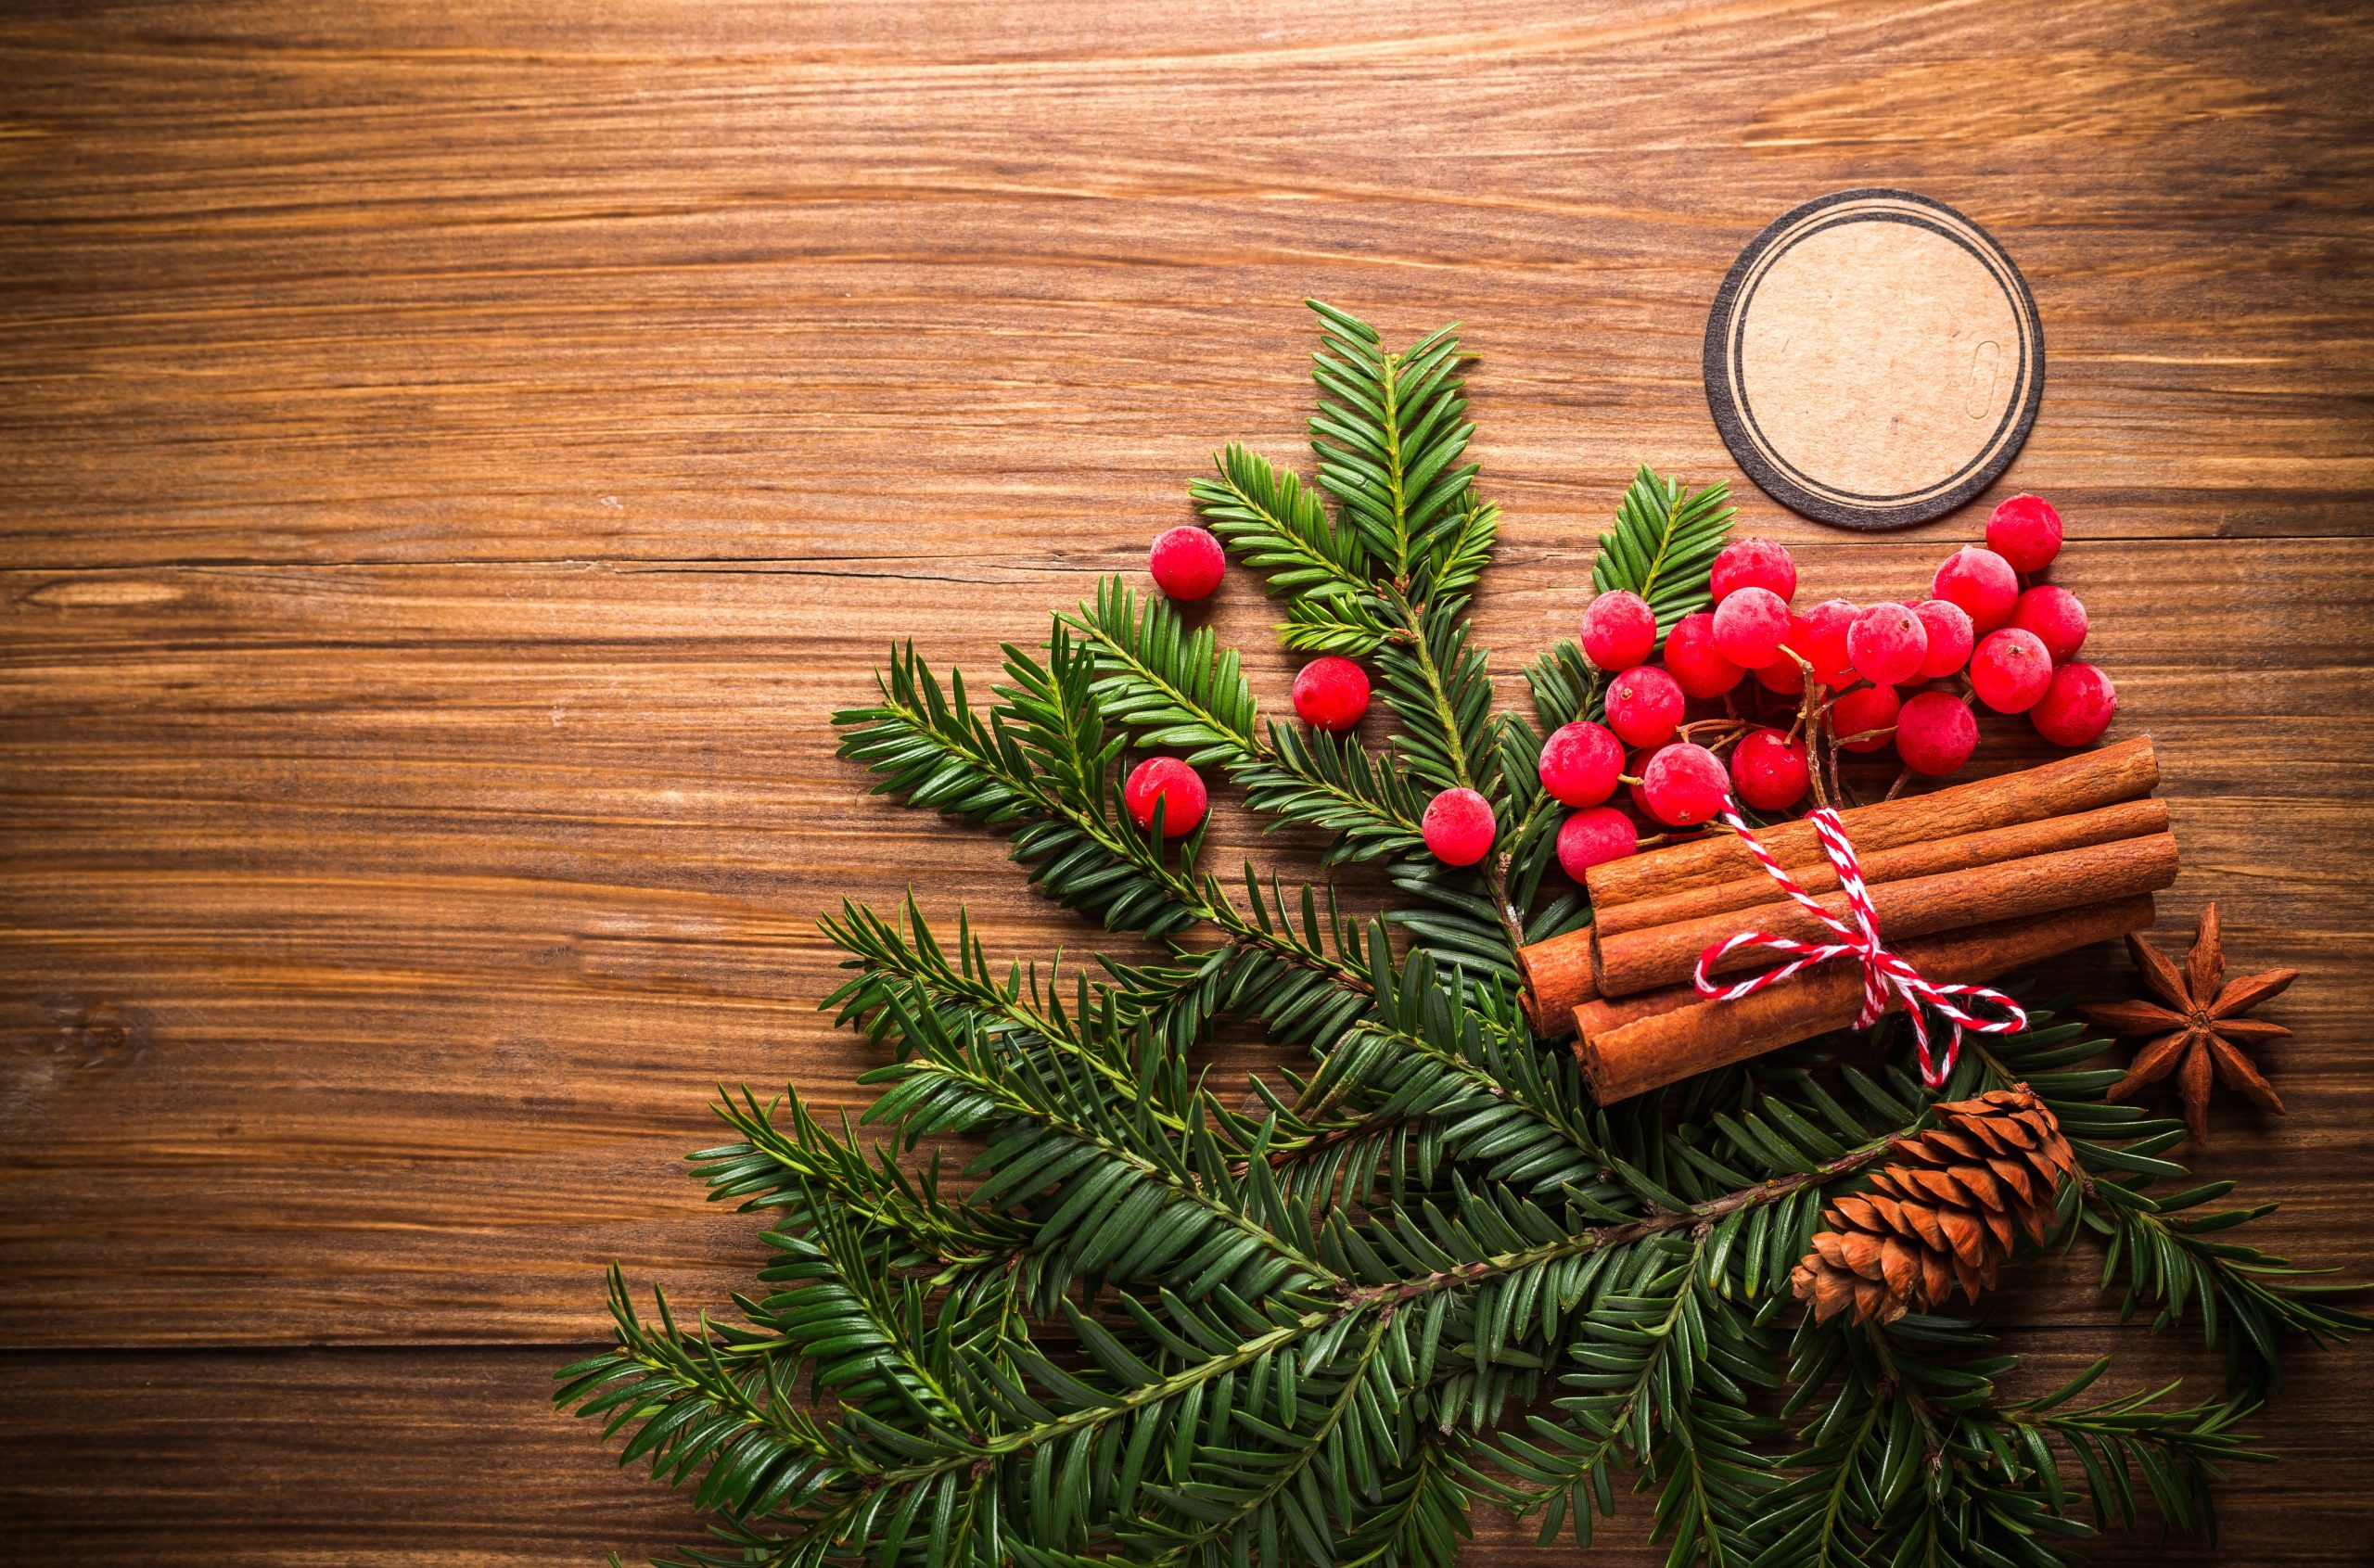 9 ways small businesses can compete with the big guys during holidays